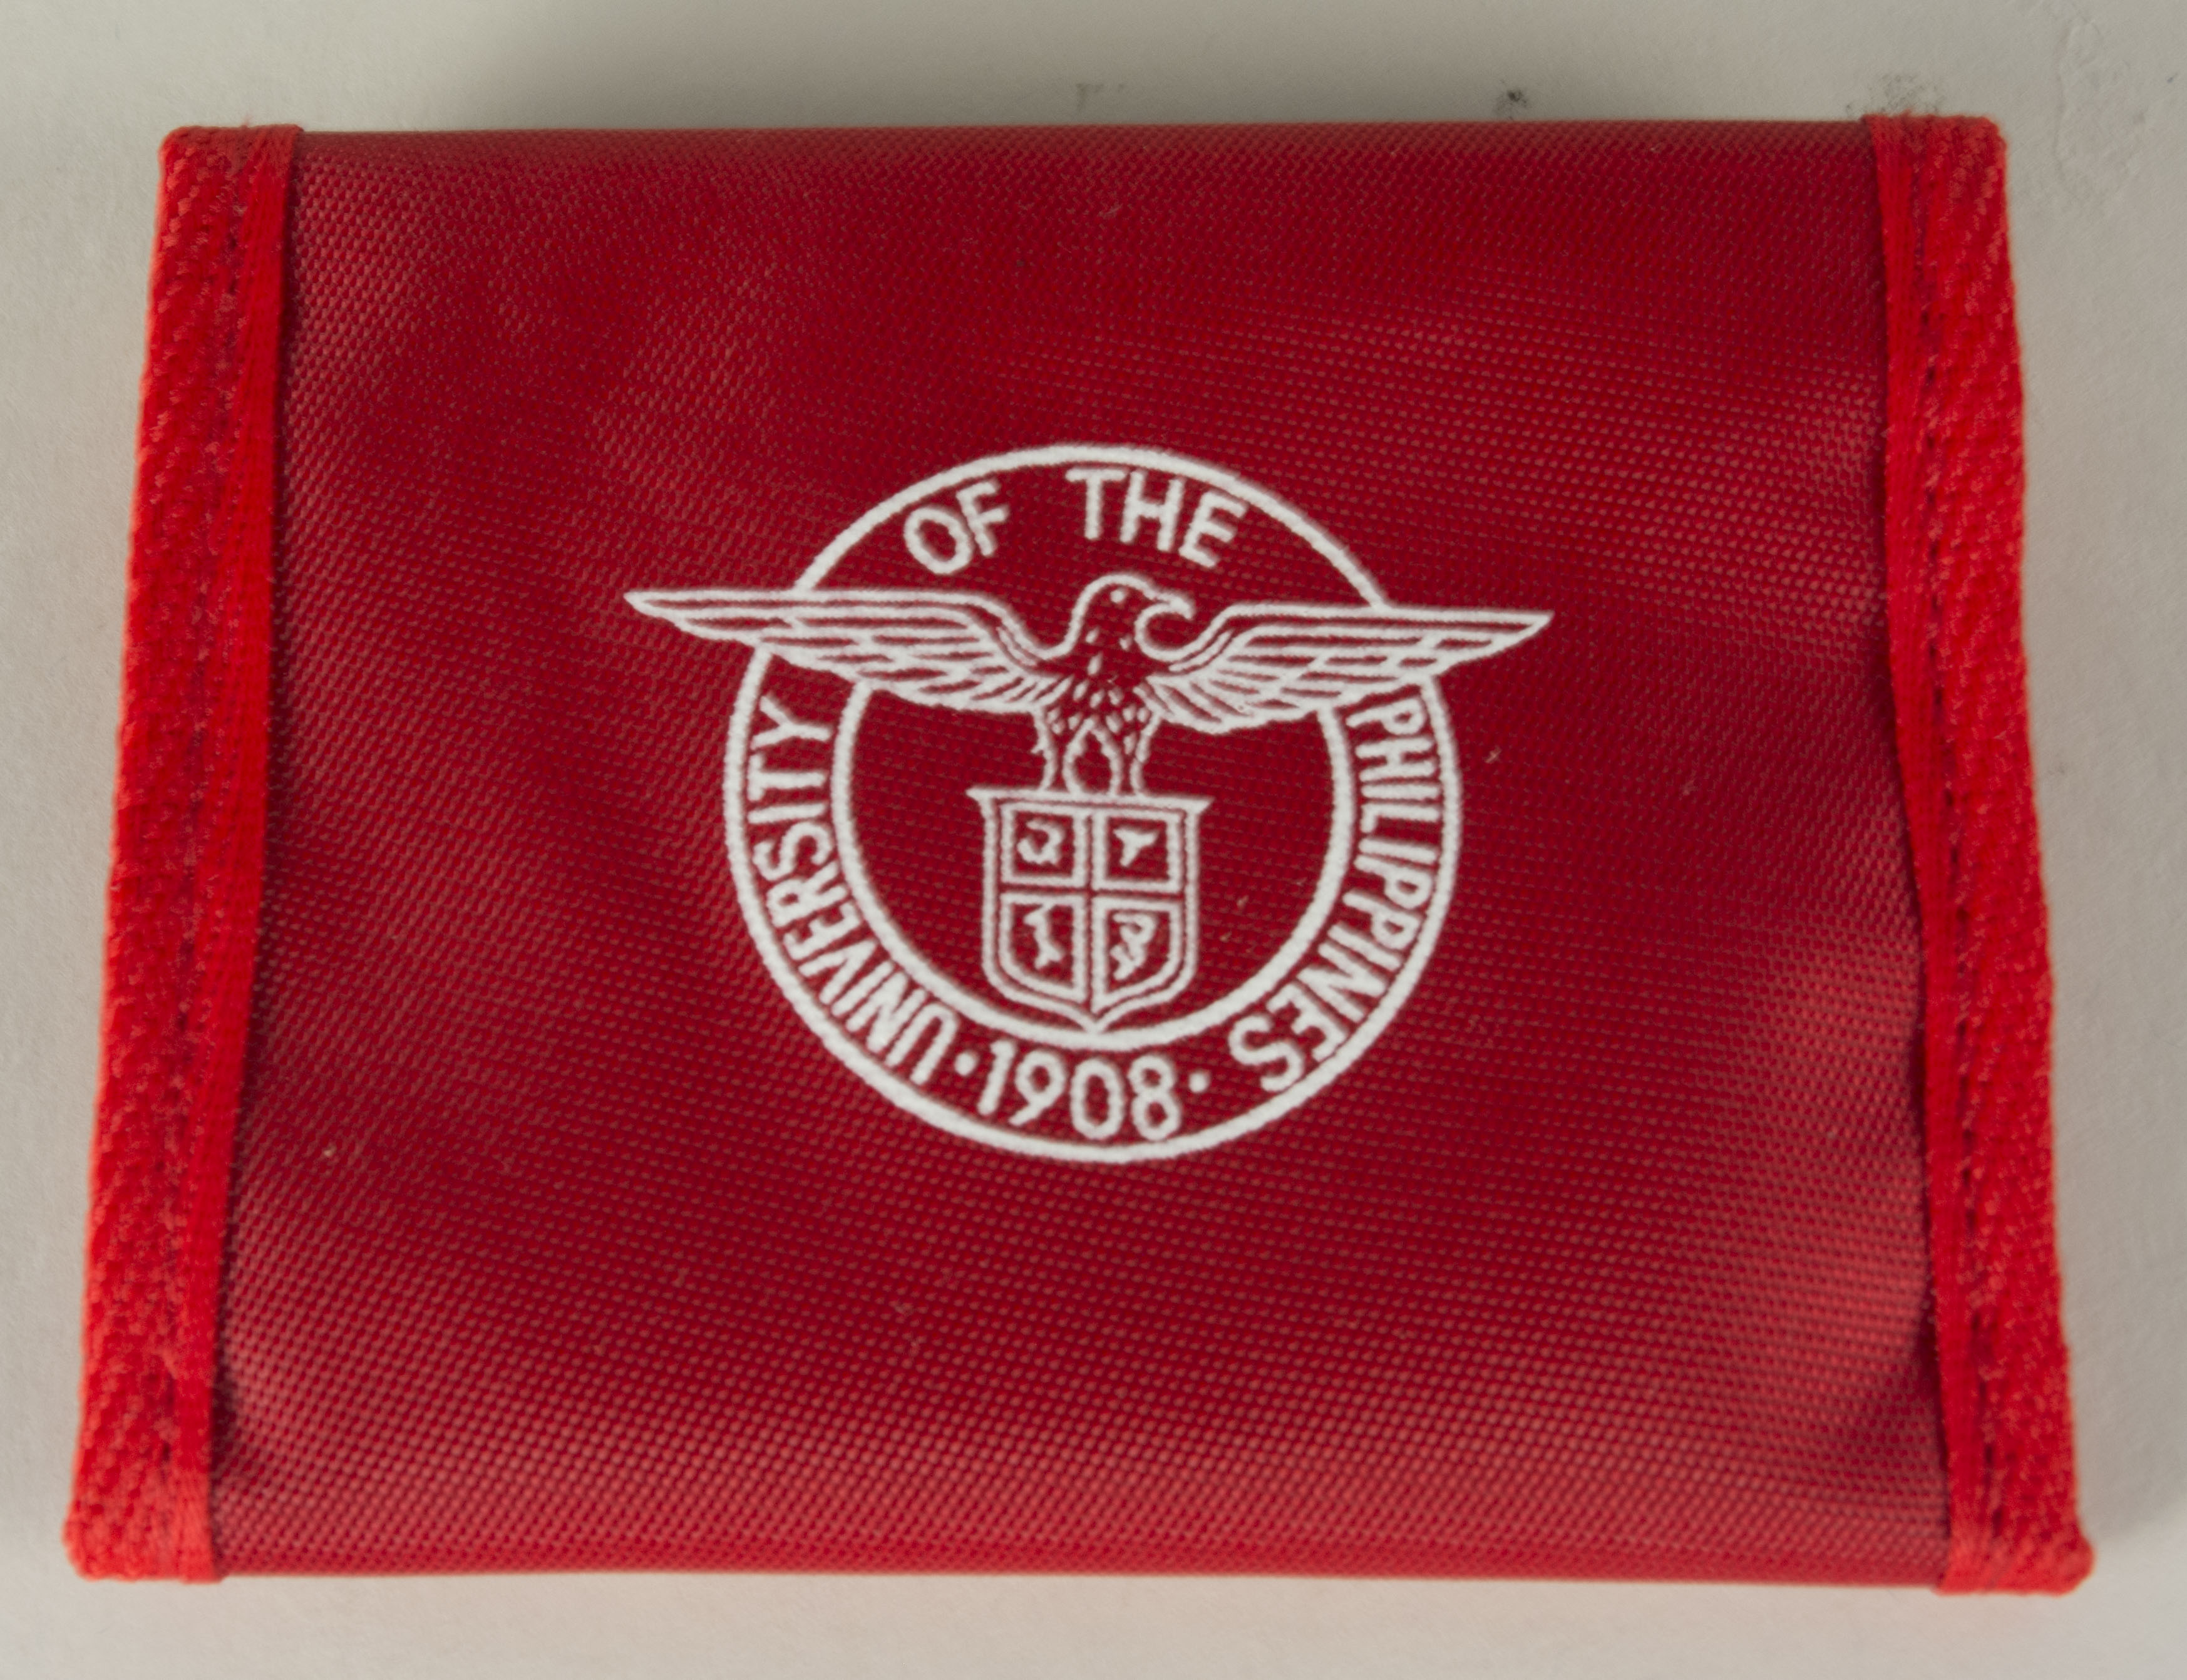 University of the Philippines wallet owned by Salazar
Salazar said the objects were made in 2008 for the University of the Philippines centennial. They were gifts from a schoolmate, given to Salazar on a  visit to the Philippines. All writing on the objects is in English. Salazar said the university was a big part of his life. Between school and work, he was connected to the University for 11+ years. Salazar said he has fond memories and many close relationships from the University. 

Any views, findings, conclusions, or recommendations expressed in this story do not necessarily represent those of the National Endowment for the Humanities. (c) Field Museum of Natural History - CC BY-NC 4.0